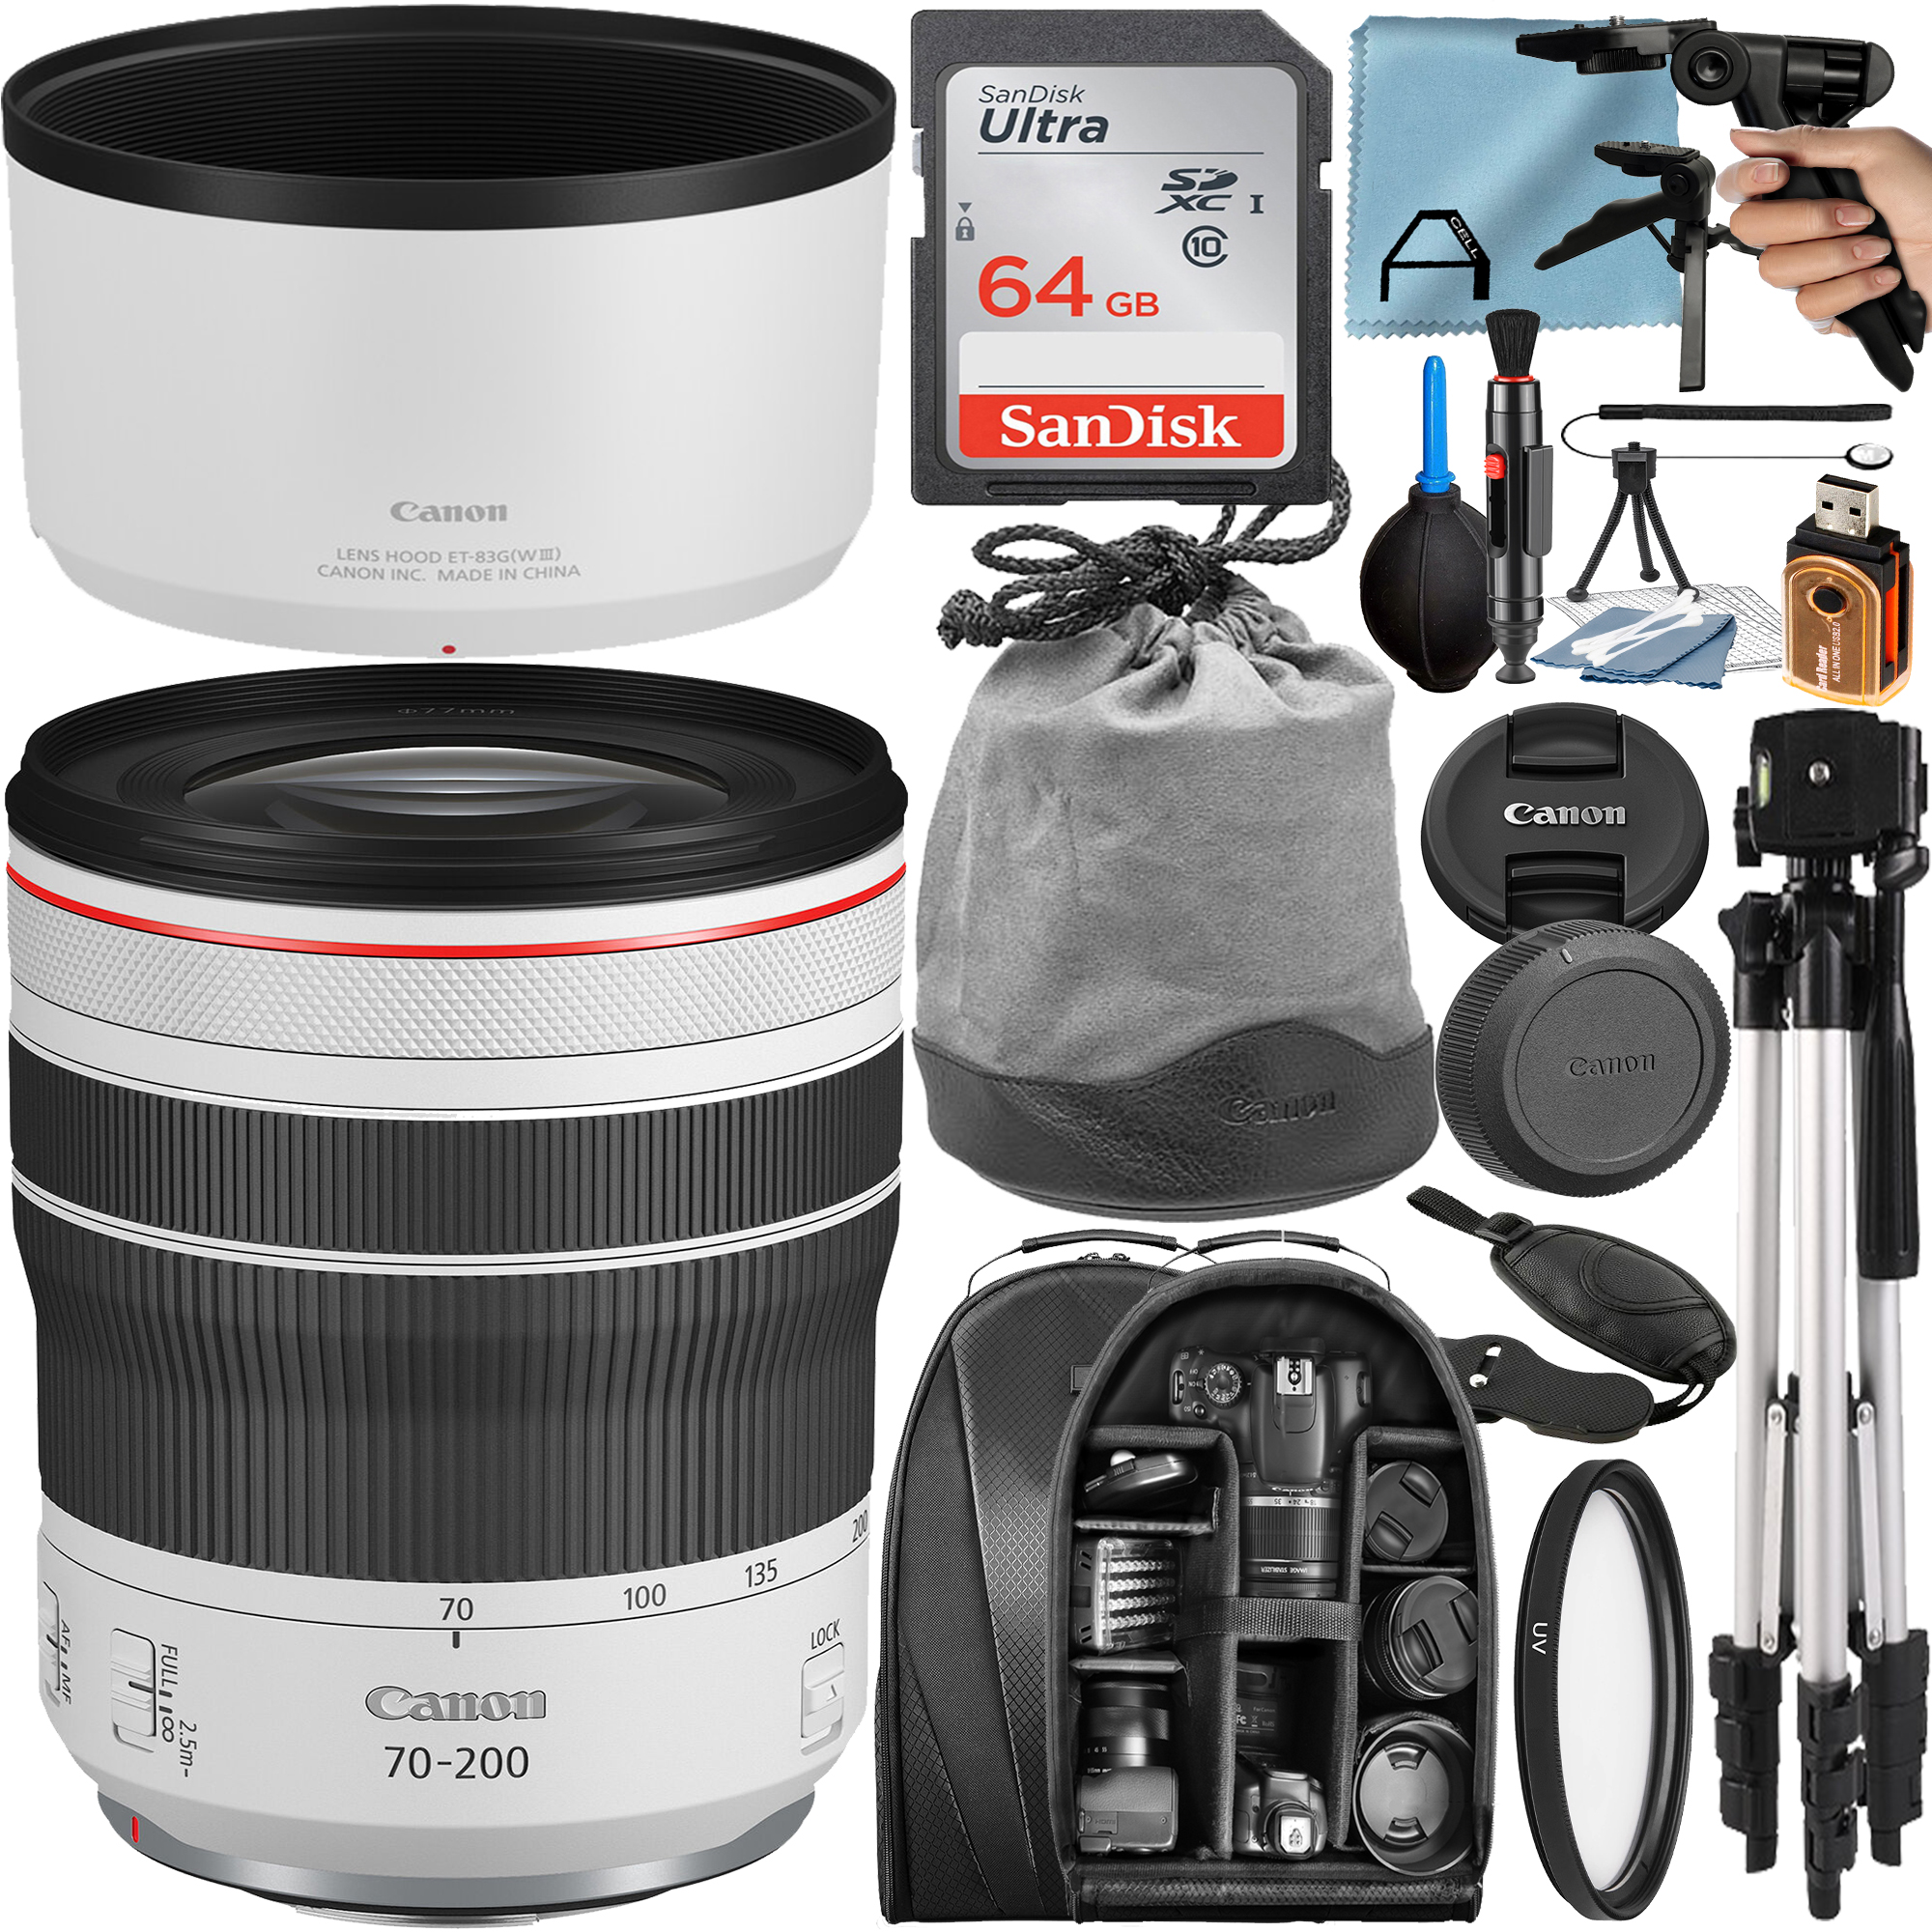 Canon RF 70-200mm F/4L IS USM Telephoto Zoom Lens with 64GB SanDisk Memory Card + Tripod + Backpack + A-Cell Accessory Bundle